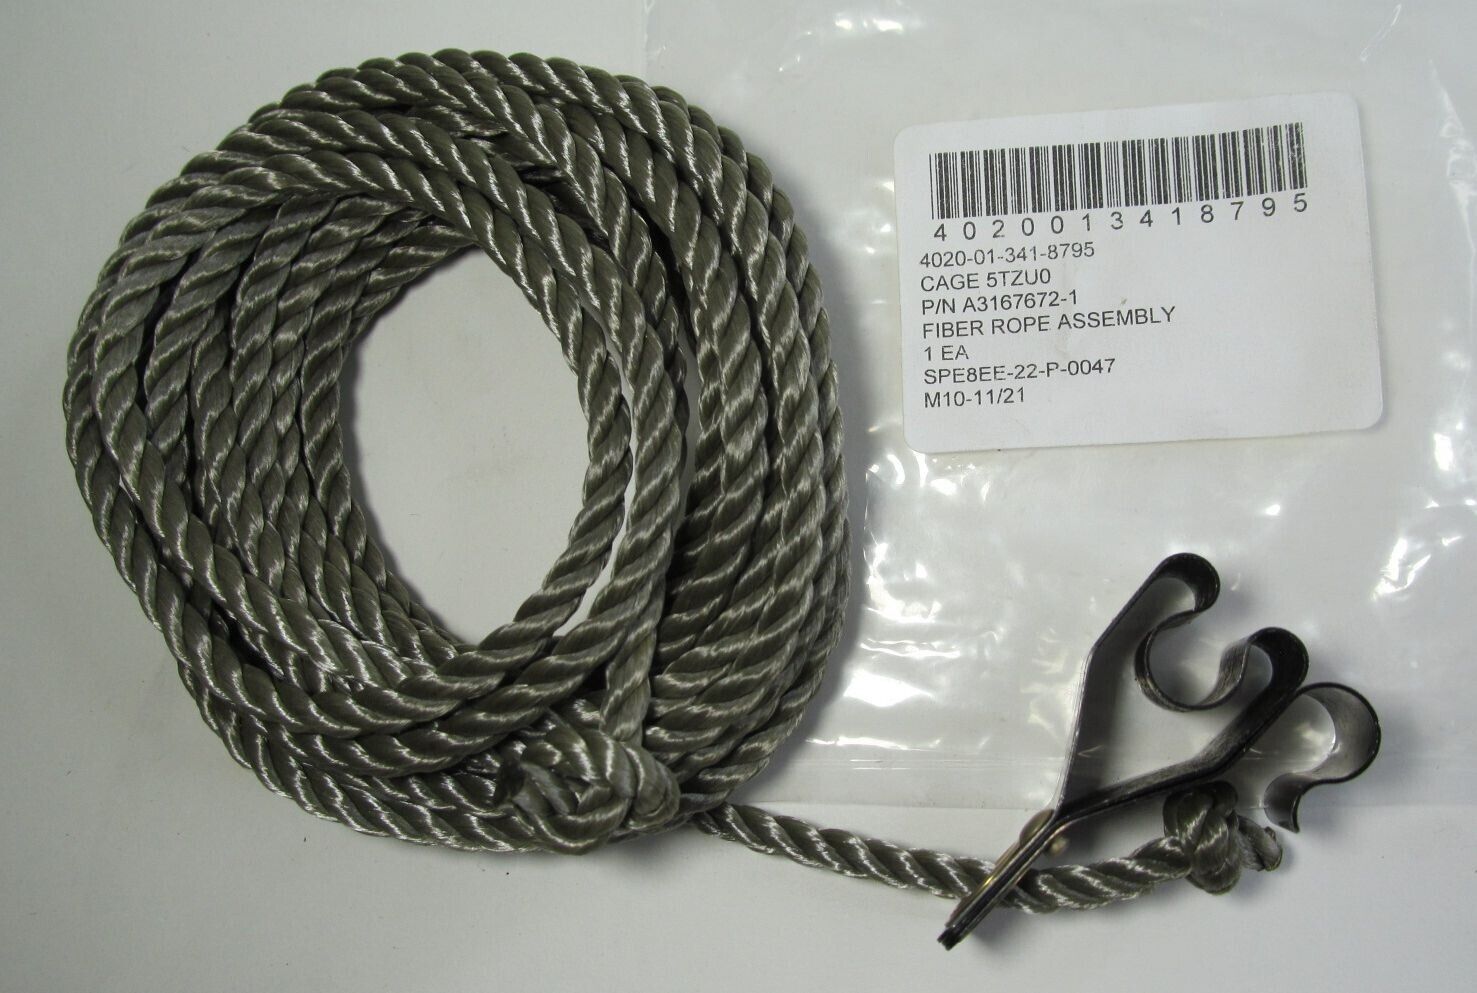 NEW GENUINE US MILITARY ISSUE ANTENNA HOLD DOWN FIBER ROPE W/ CLIP 4020-01-341-8